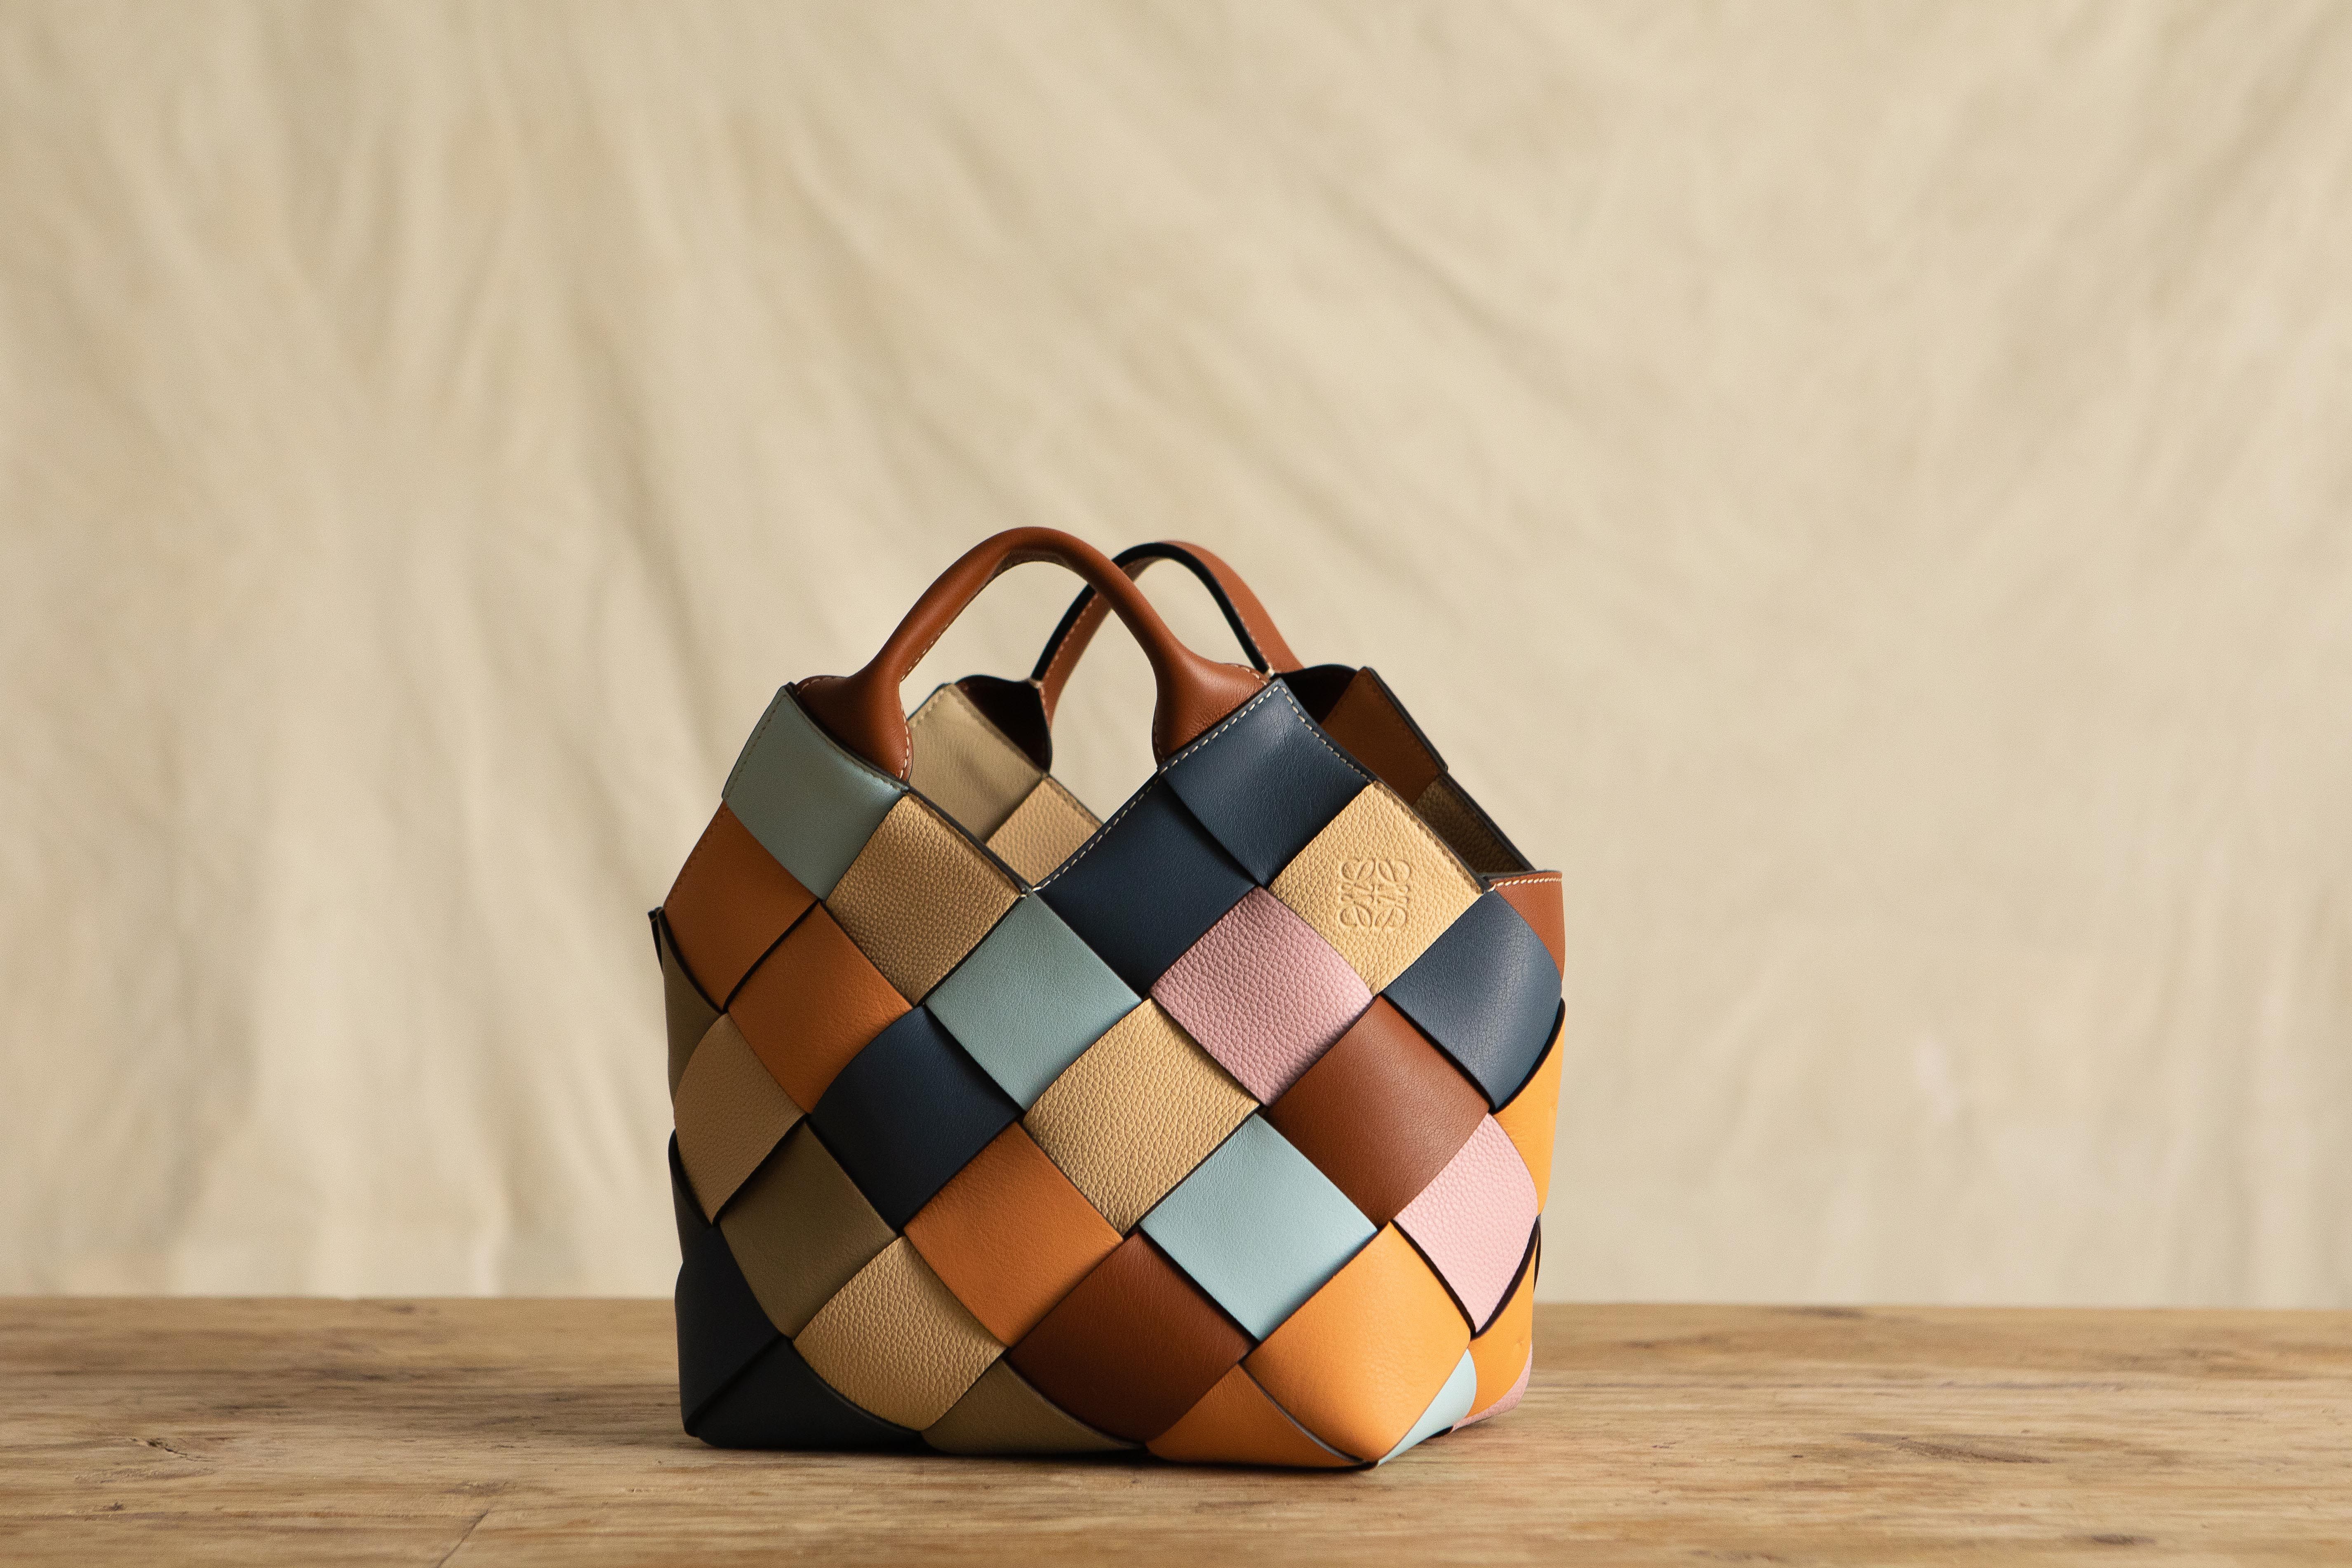 Loewe Small or Medium Basket Bag? Anyone own this bag and can share their  thoughts? : r/handbags